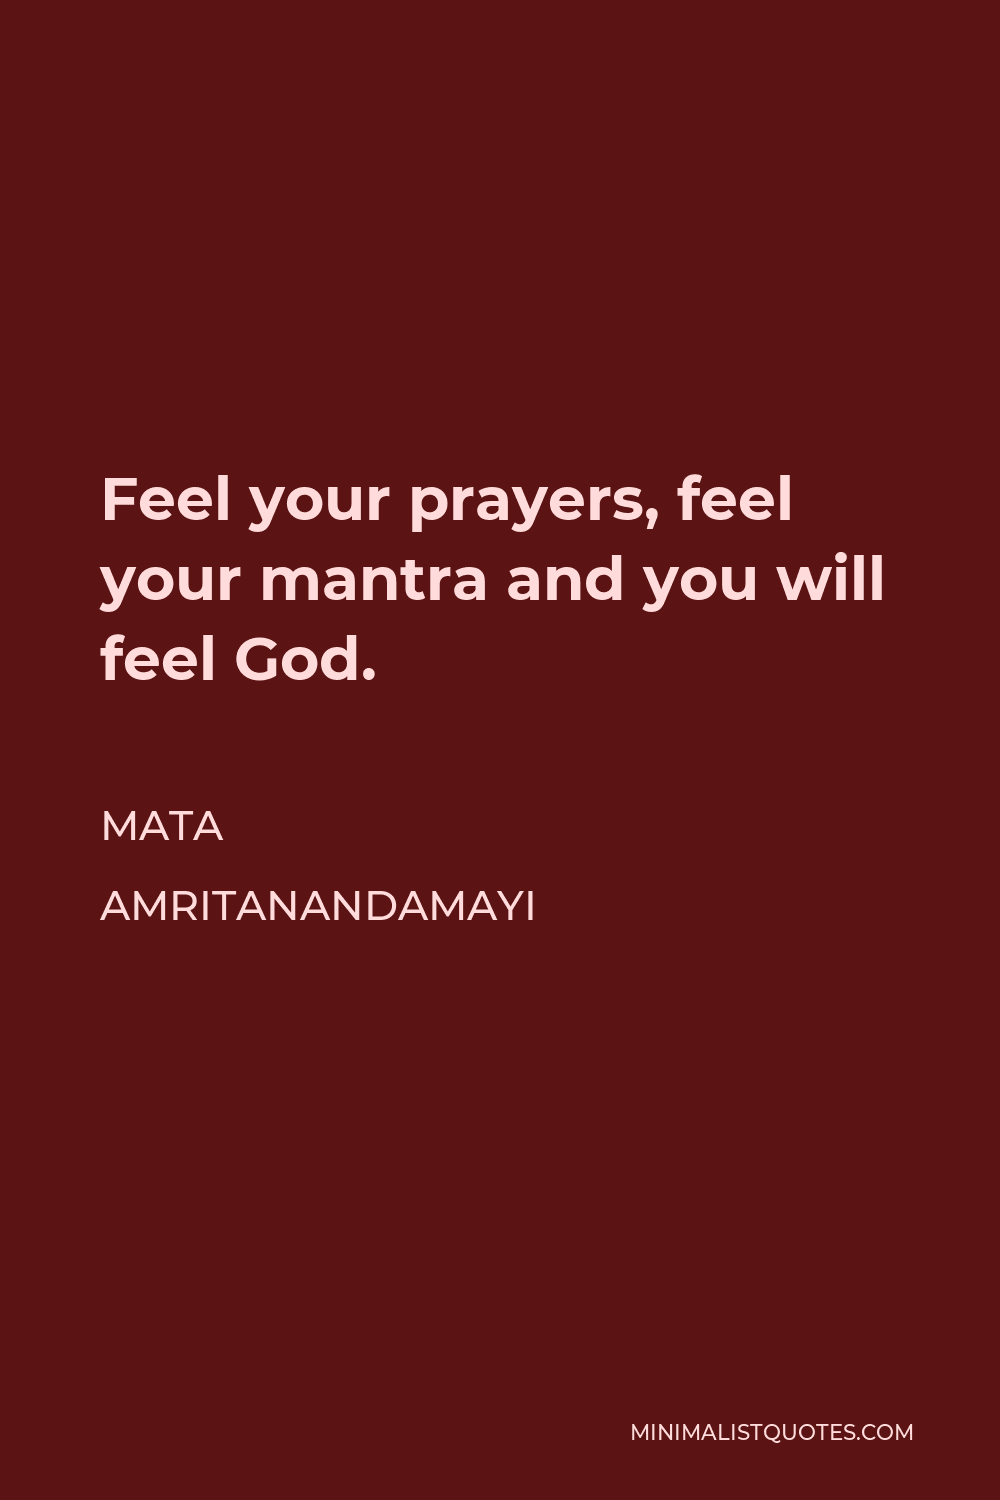 Mata Amritanandamayi Quote - Feel your prayers, feel your mantra and you will feel God.